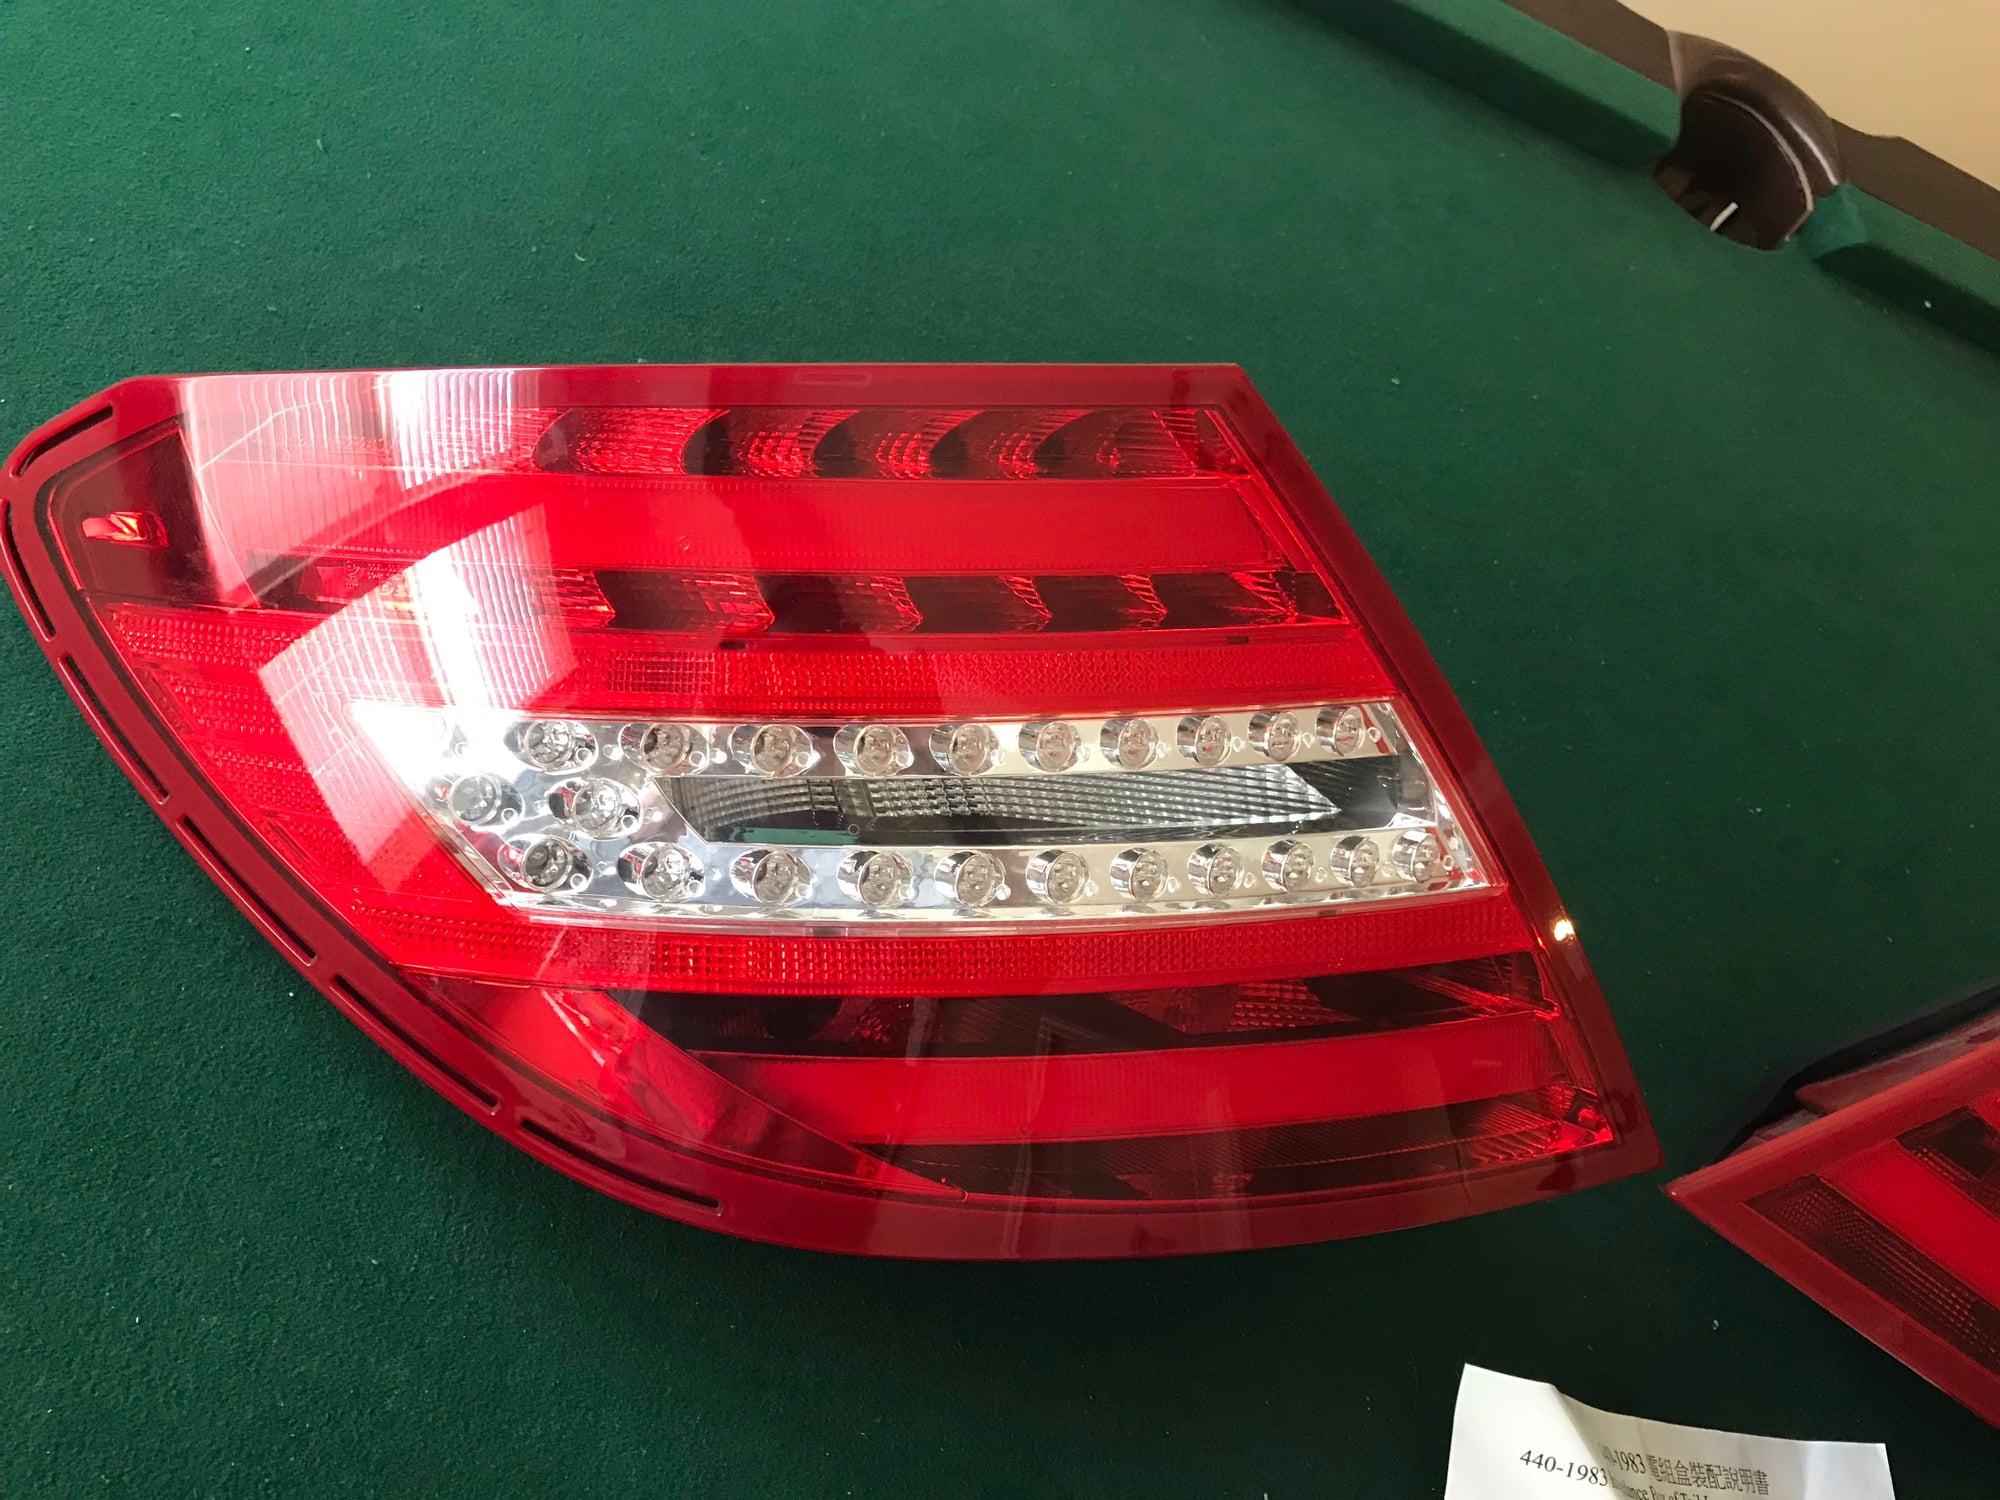 Exterior Body Parts - Mercedes 2008-2011 C-Class LED Taillights - DEPO W204 C300 C350 C63 - Used - 2008 to 2011 Mercedes-Benz C63 AMG - 2008 to 2011 Mercedes-Benz C300 - 2008 to 2011 Mercedes-Benz C350 - Houston, TX 77002, United States